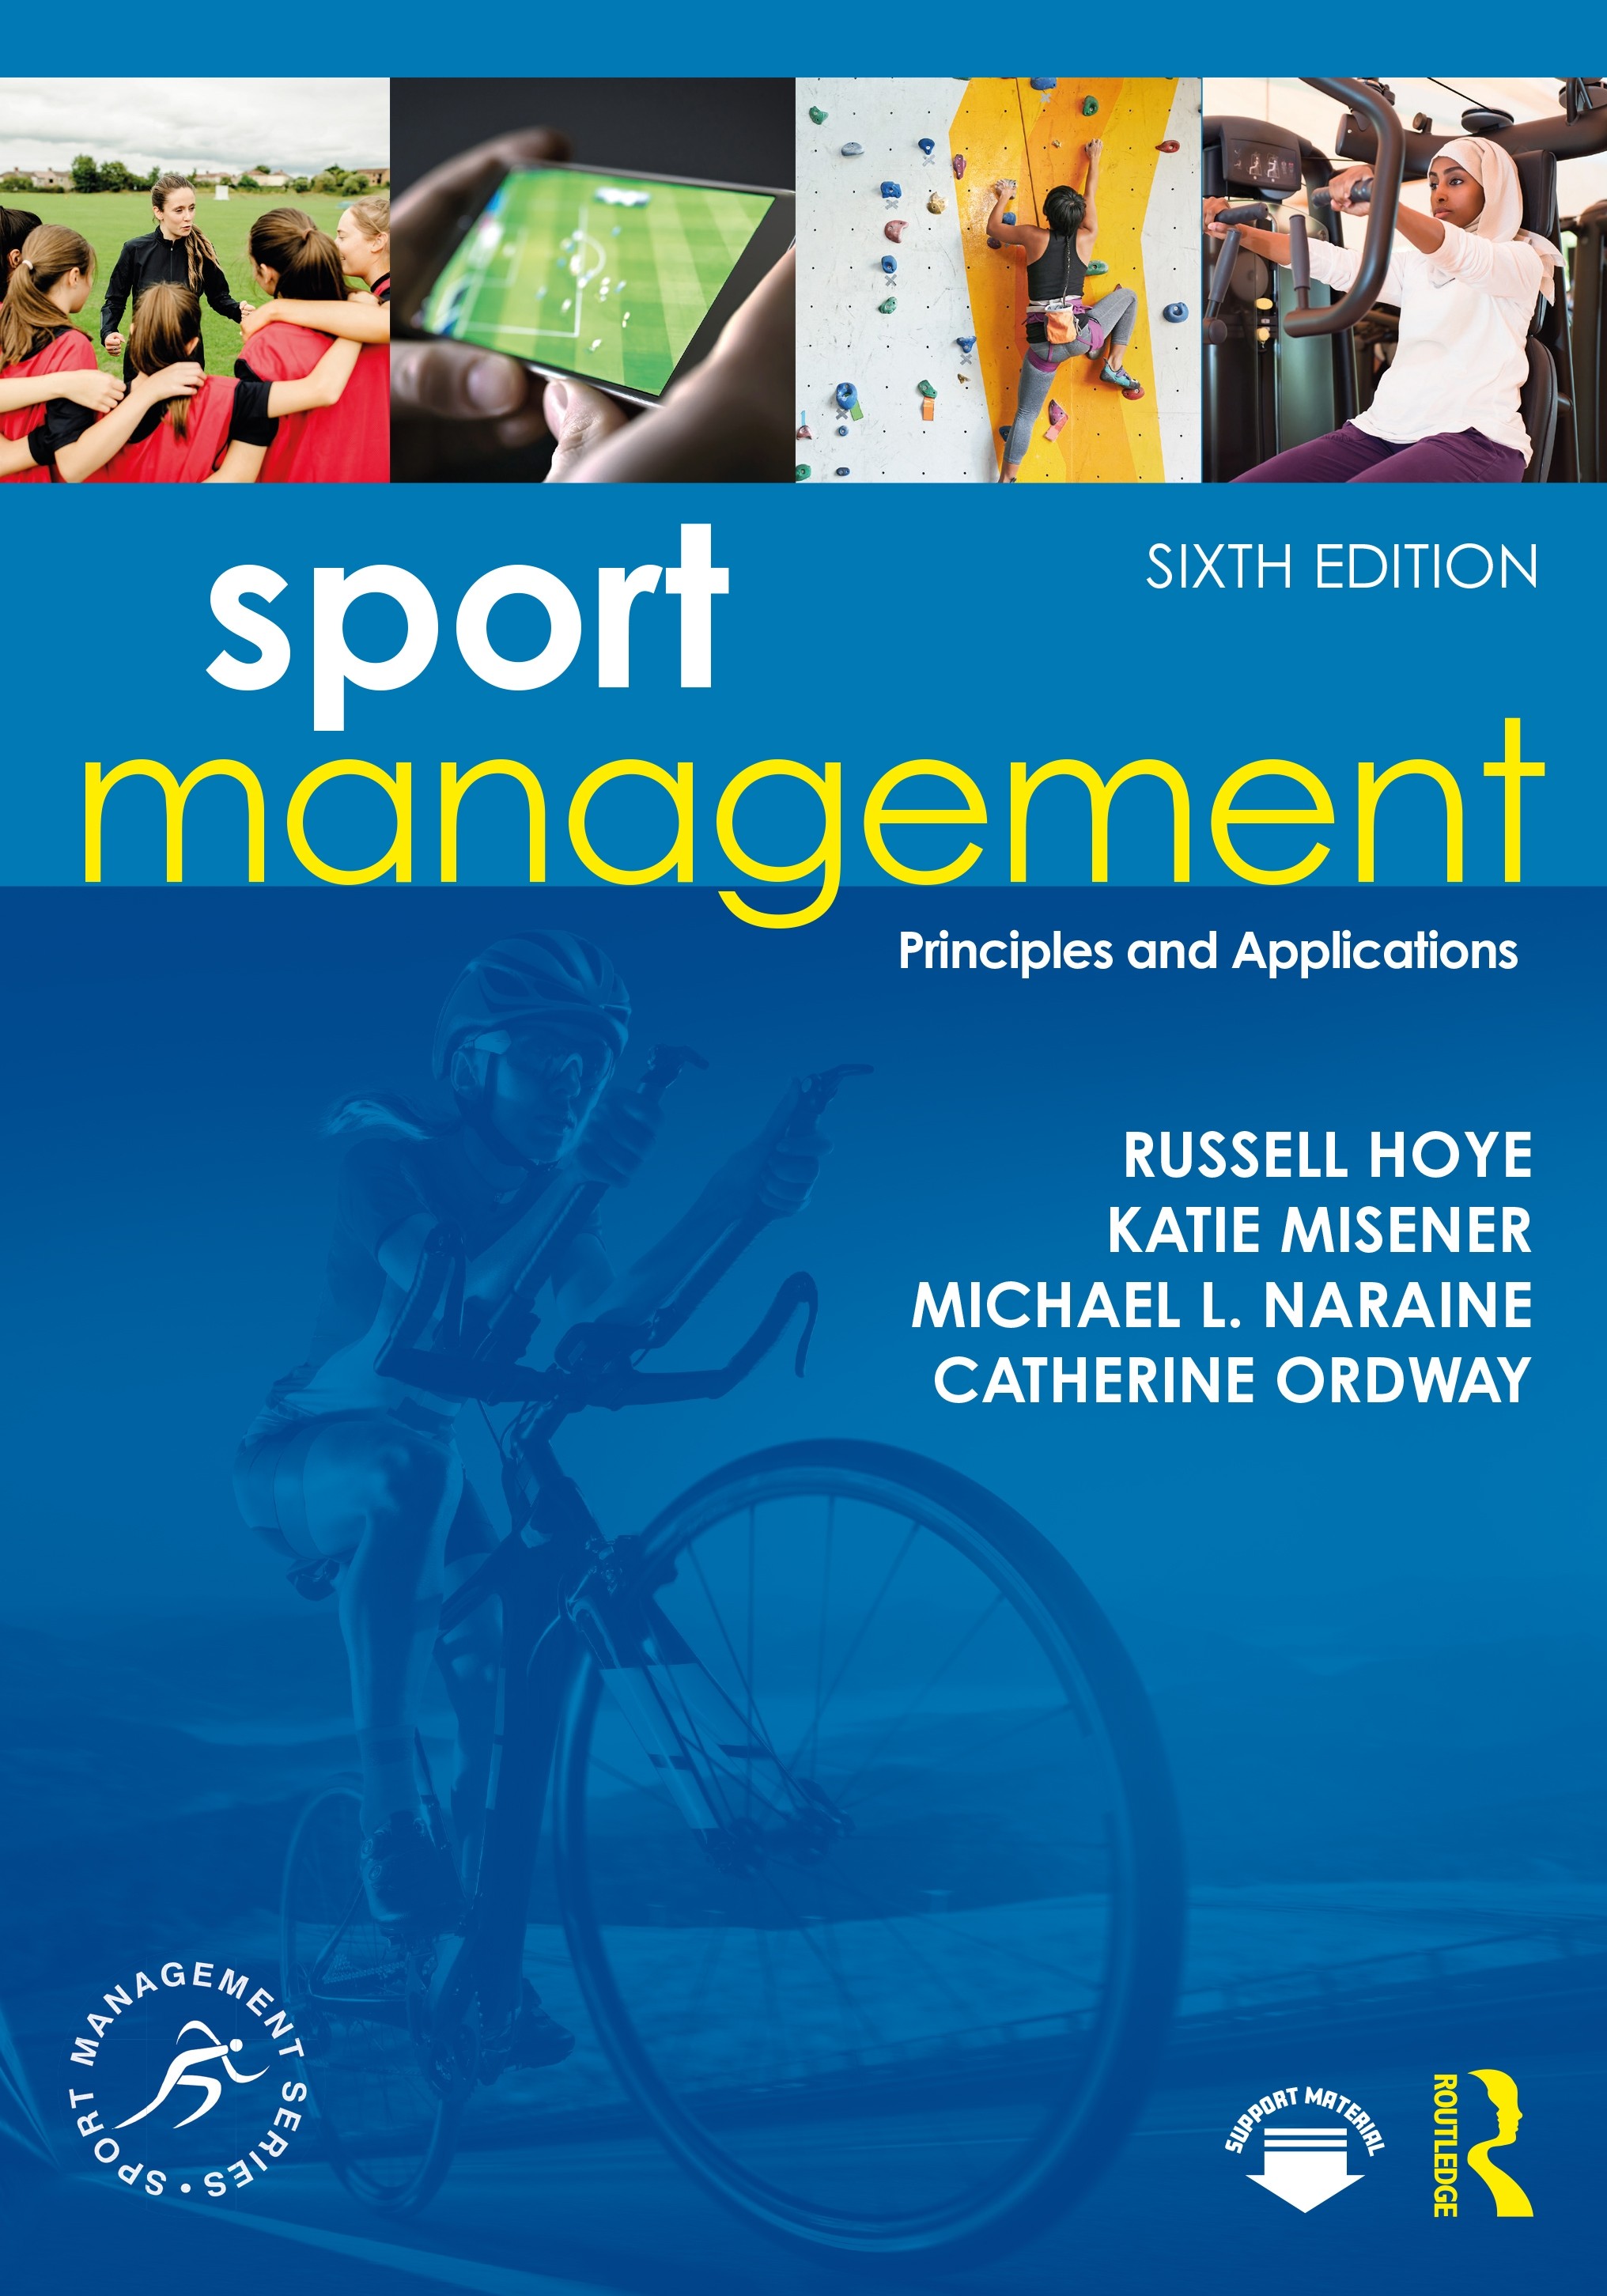 coursework for sports management